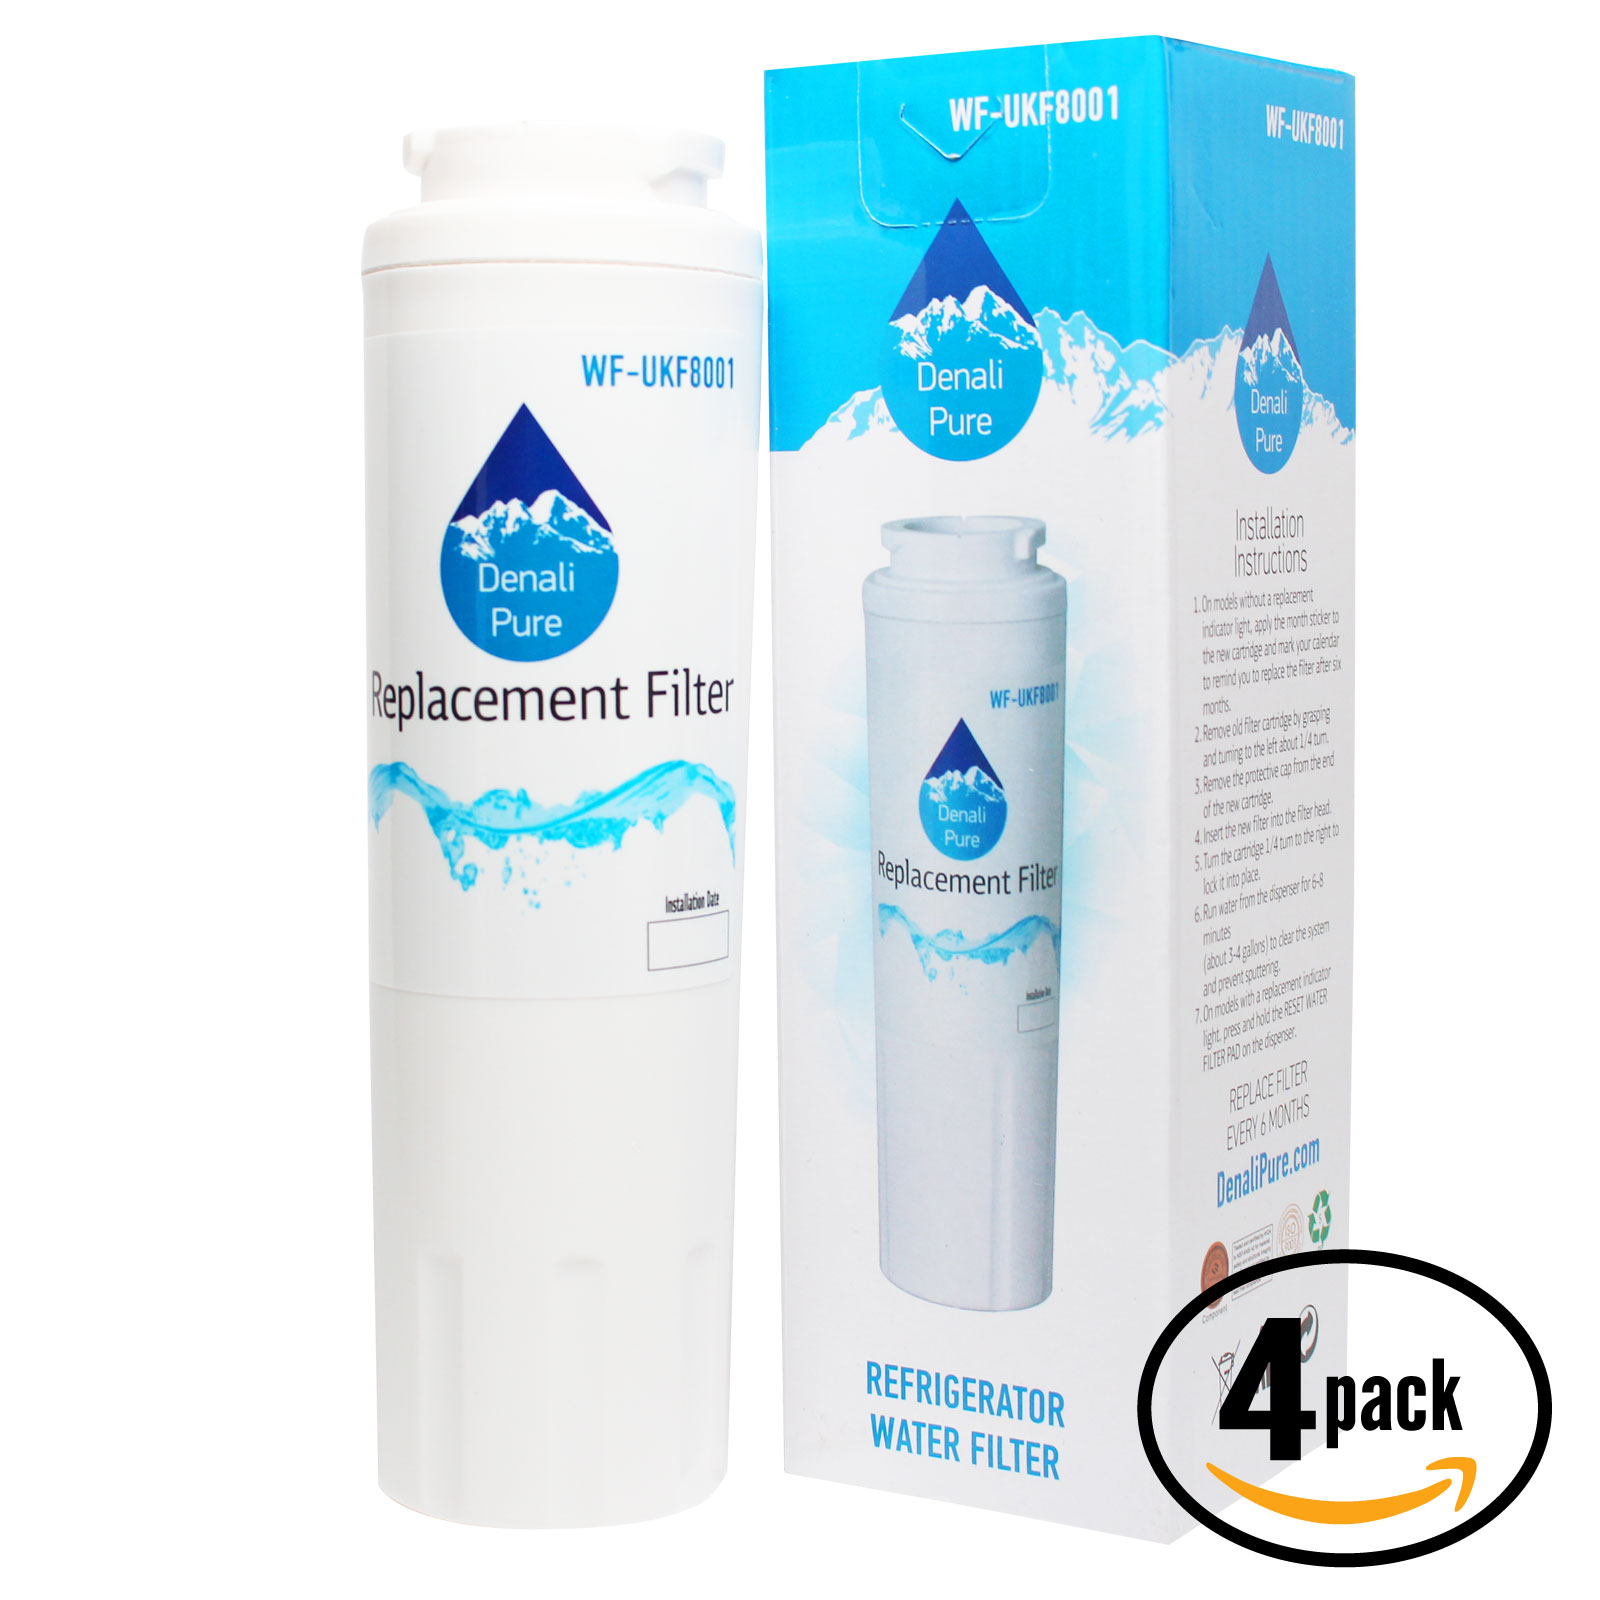 4-Pack Replacement for KitchenAid KFCS22EVMS4 Refrigerator Water Filter - Compatible with KitchenAid 4396395 Fridge Water Filter Cartridge - image 1 of 4